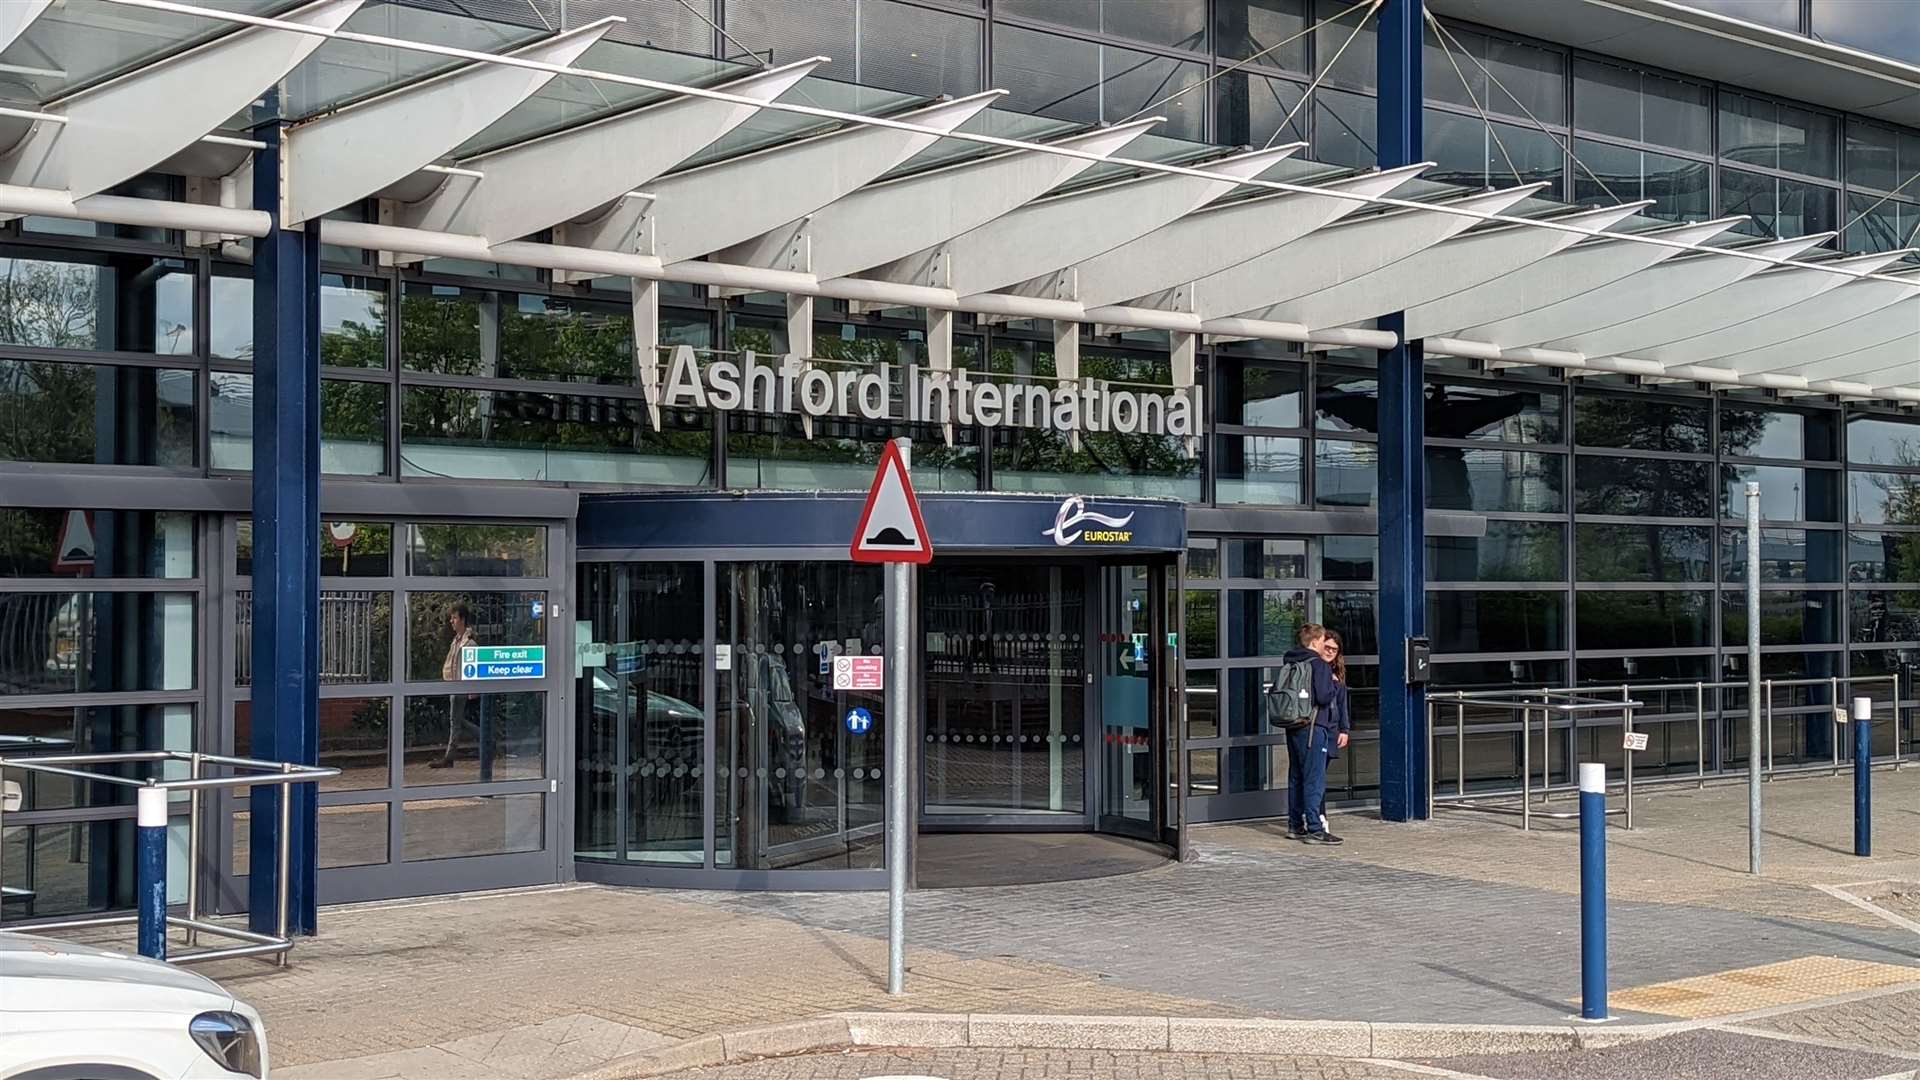 Ashford International station, where Eurostar services to Europe have been suspended since the start of the Covid-19 pandemic